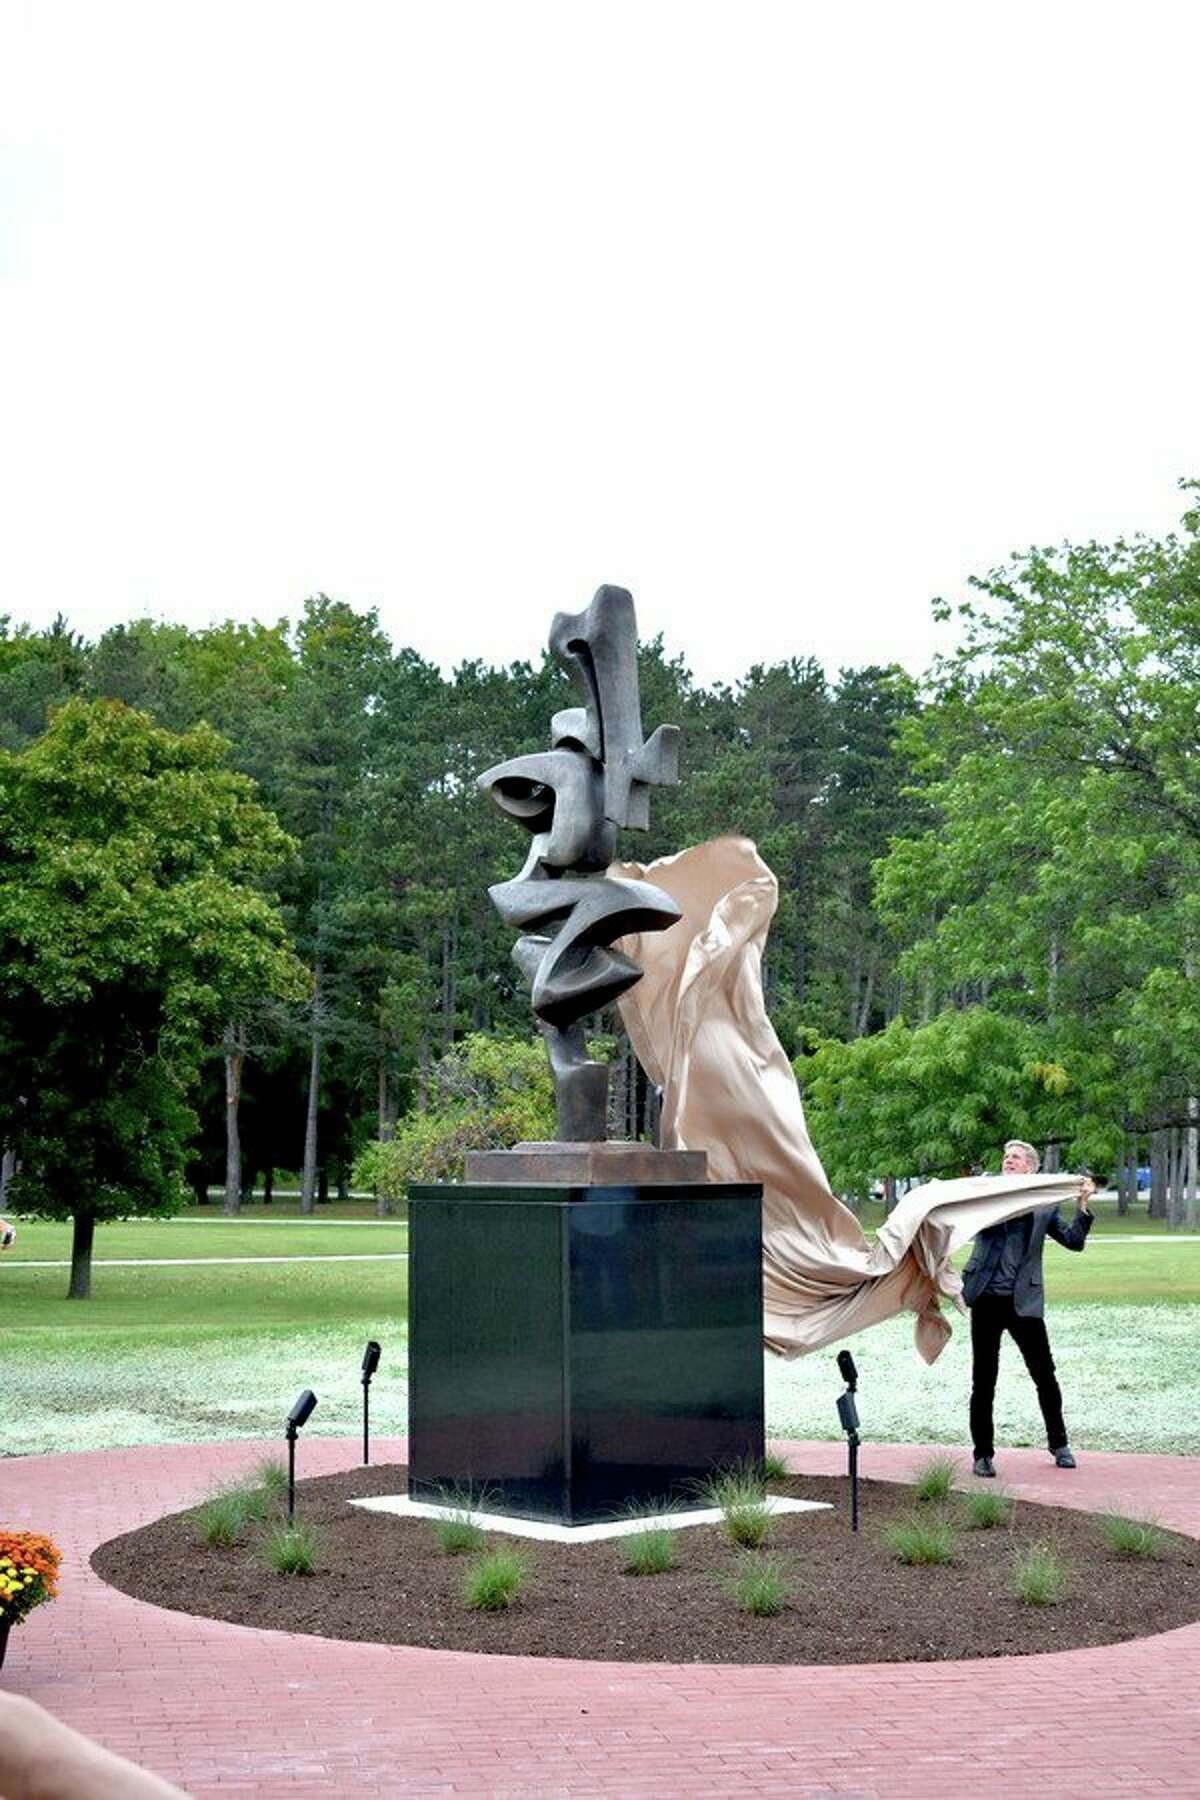 Sculptor sponsor Dr. Andrew Riemer unveils a bronze sculpture at the West Shore Community College Alumni Plaza, the first large-scale sculpture by Riverton Township artist Manierre Dawson. (Courtesy Photo)